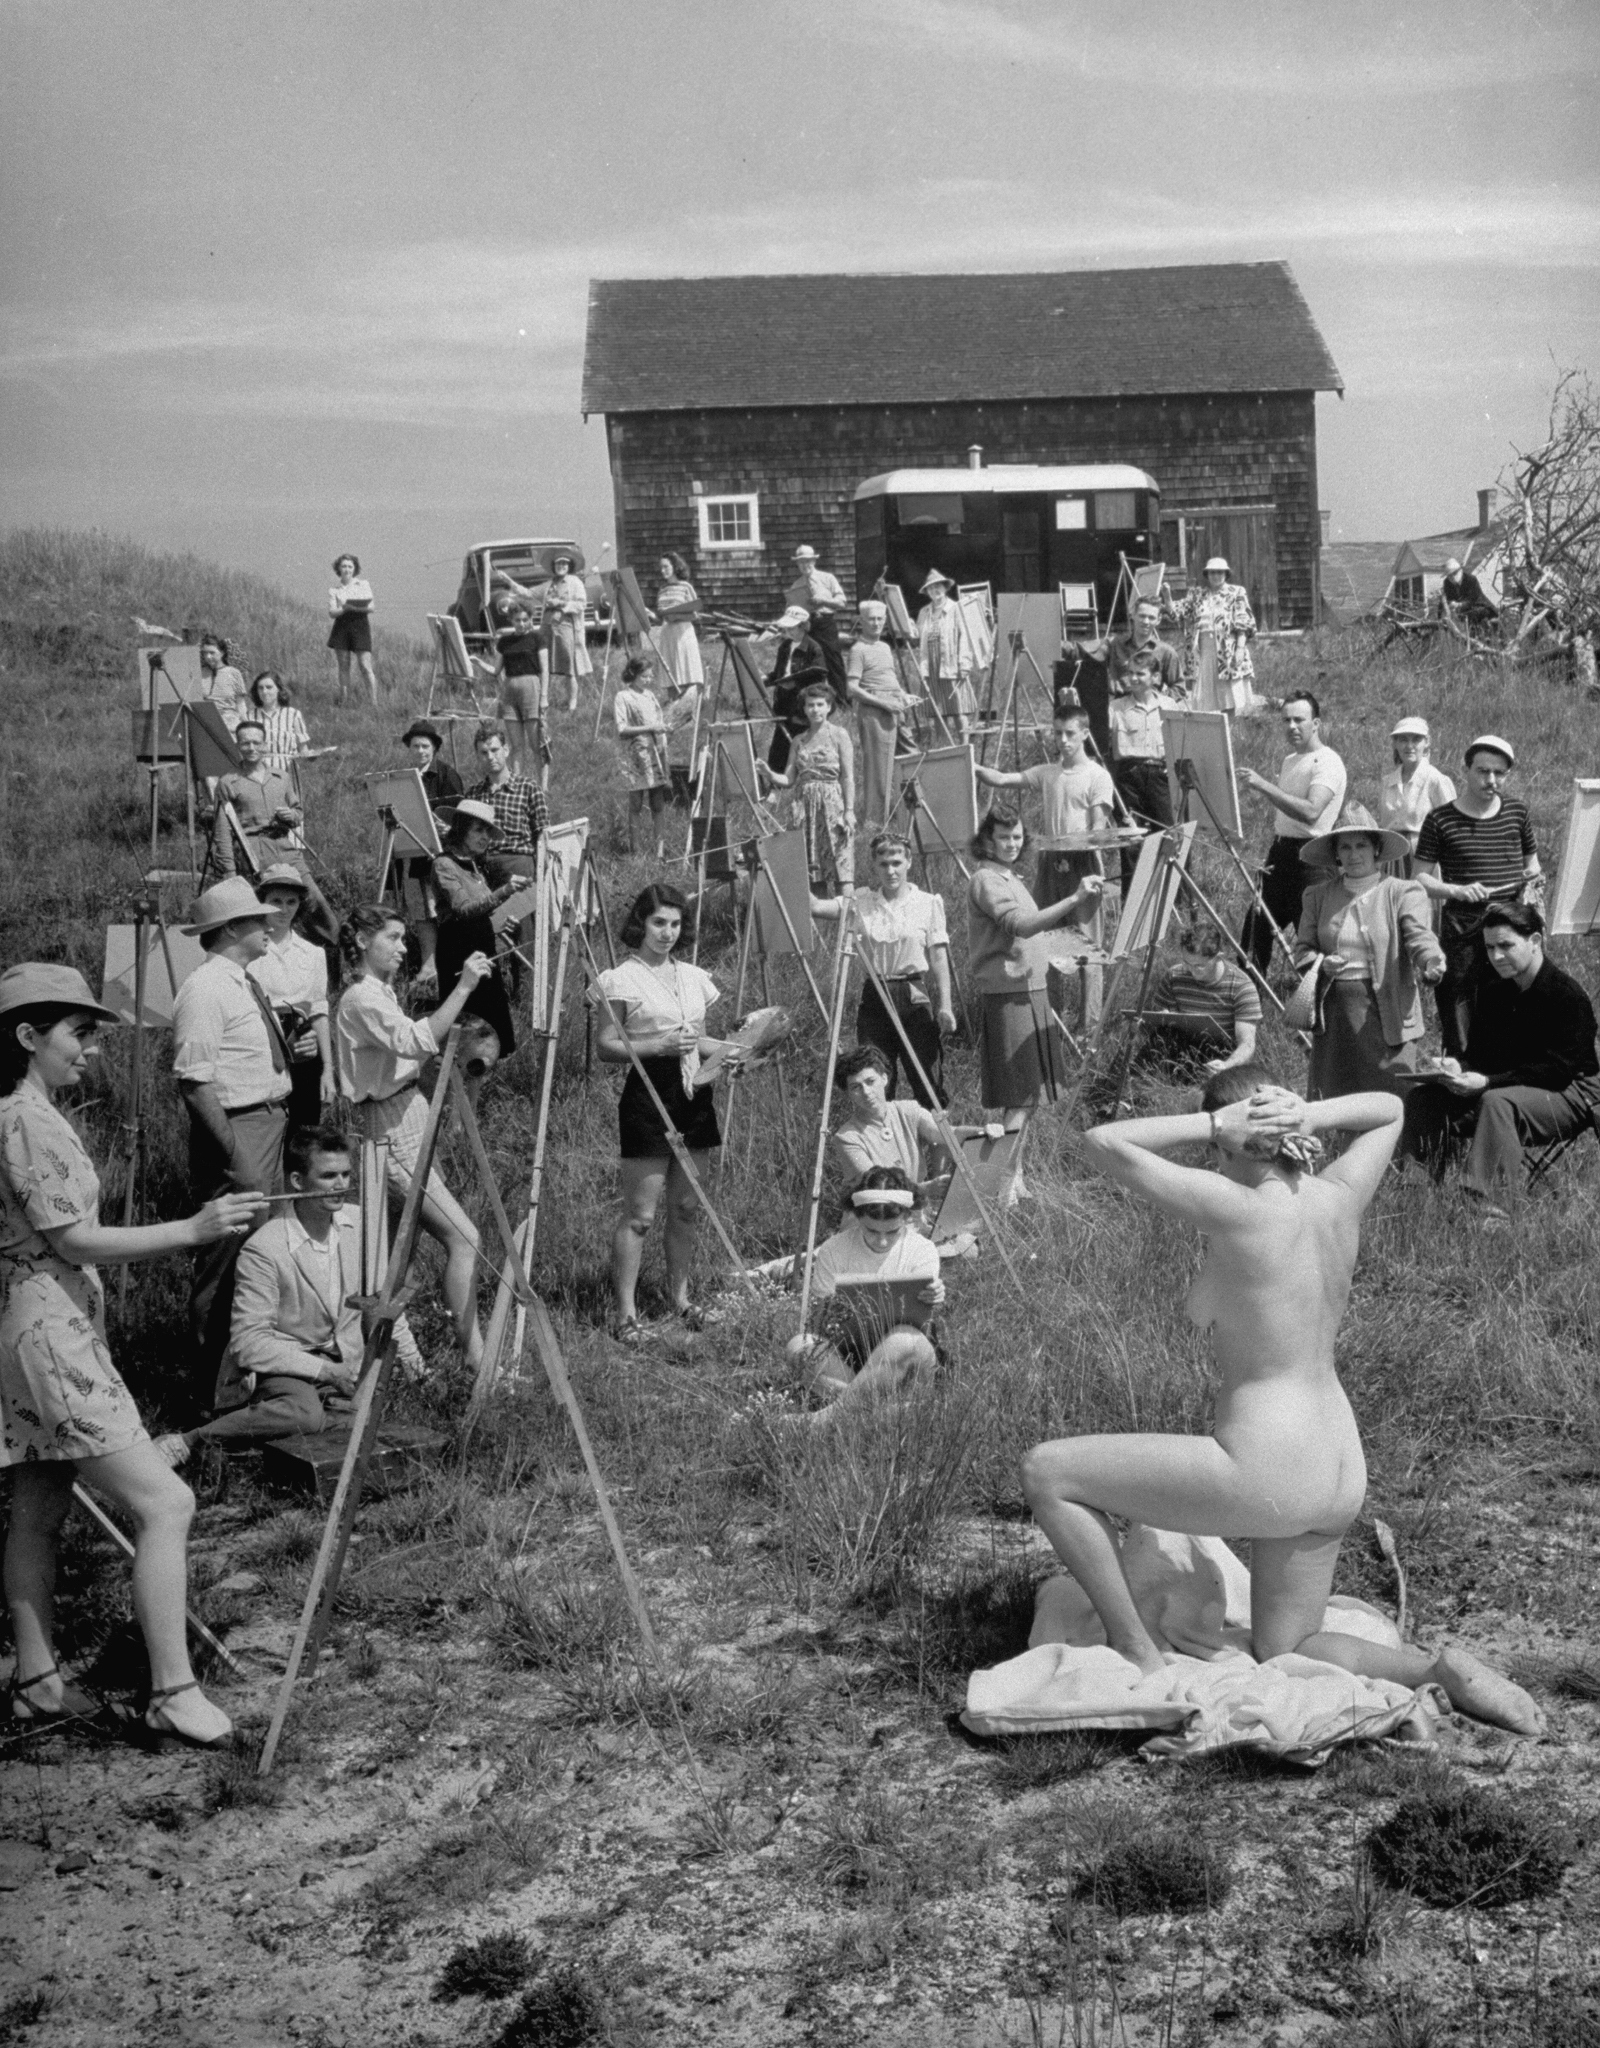 A large group of Farnsworth Art School students paint a nude model in 1946.